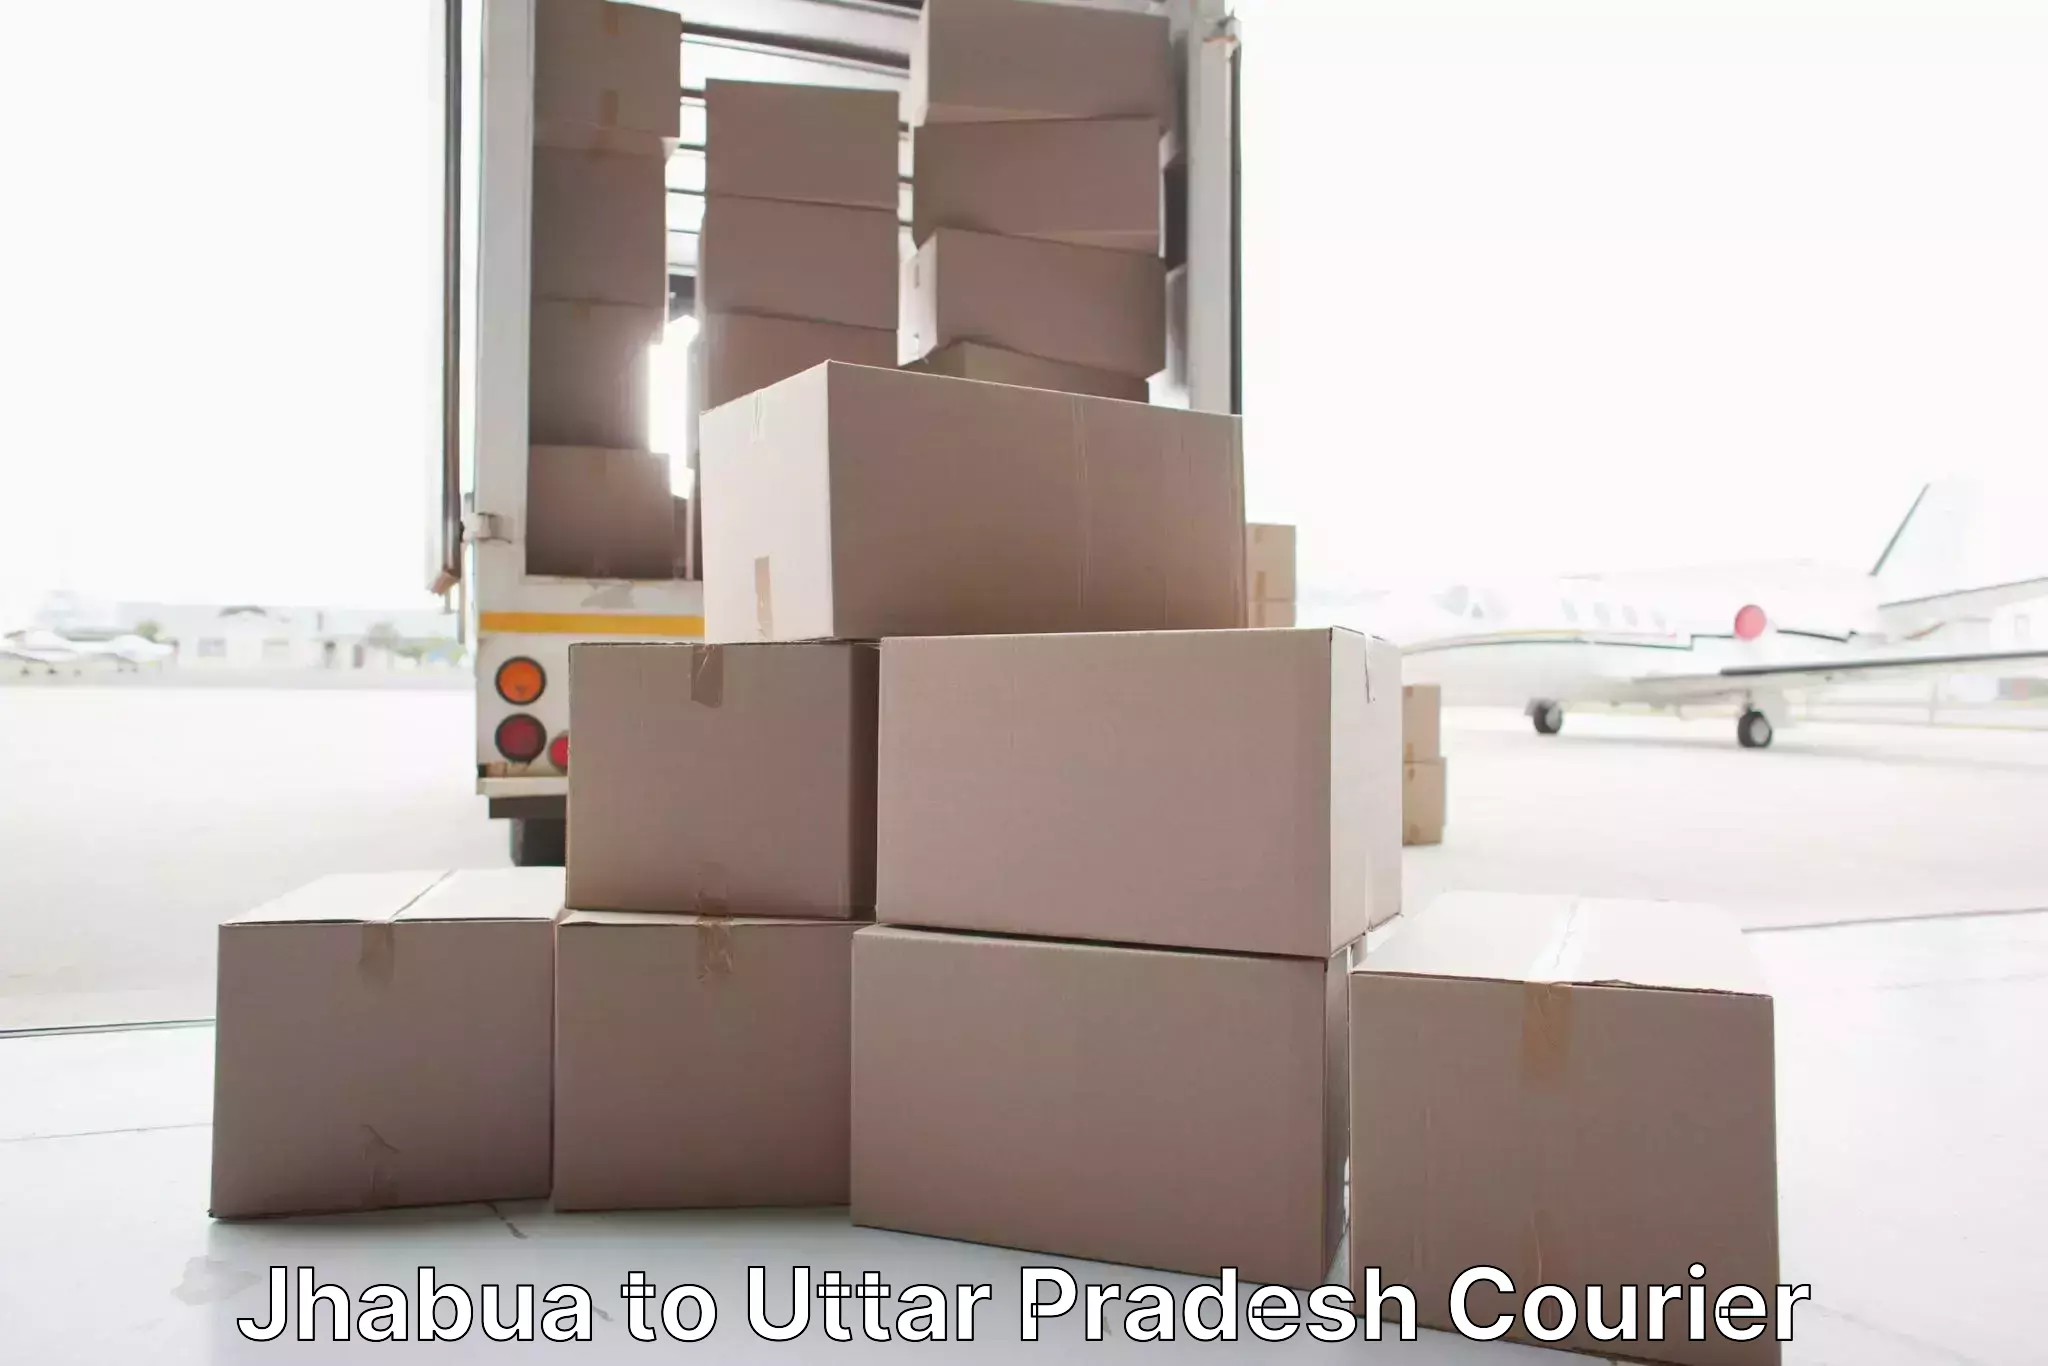 Efficient packing and moving Jhabua to Orai